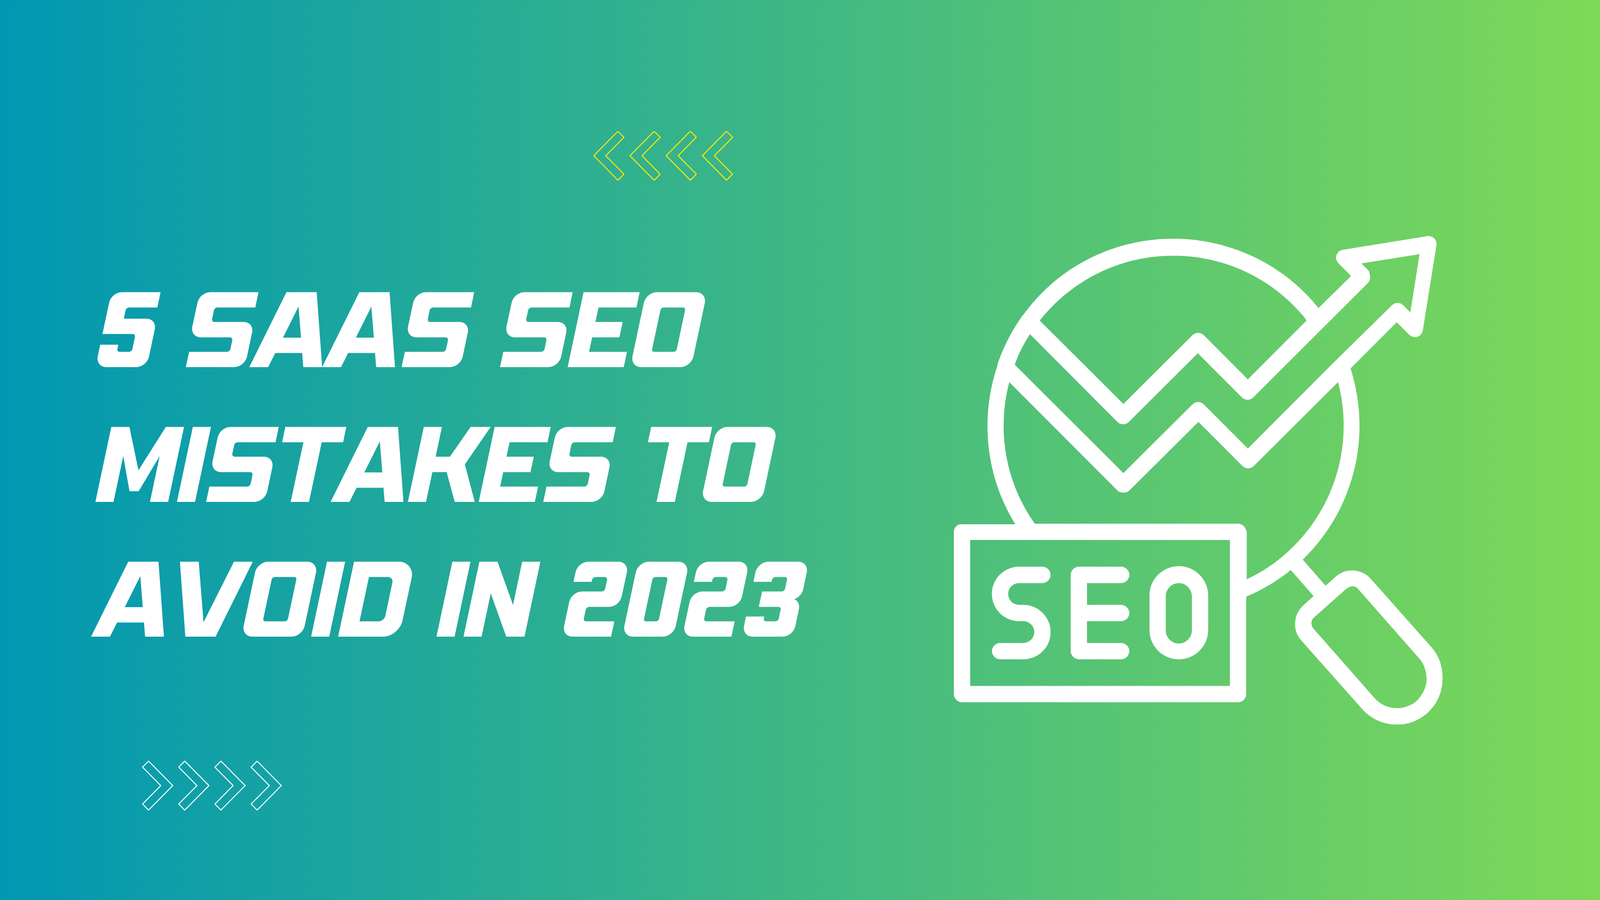 5 SaaS SEO Mistakes to Avoid in 2023